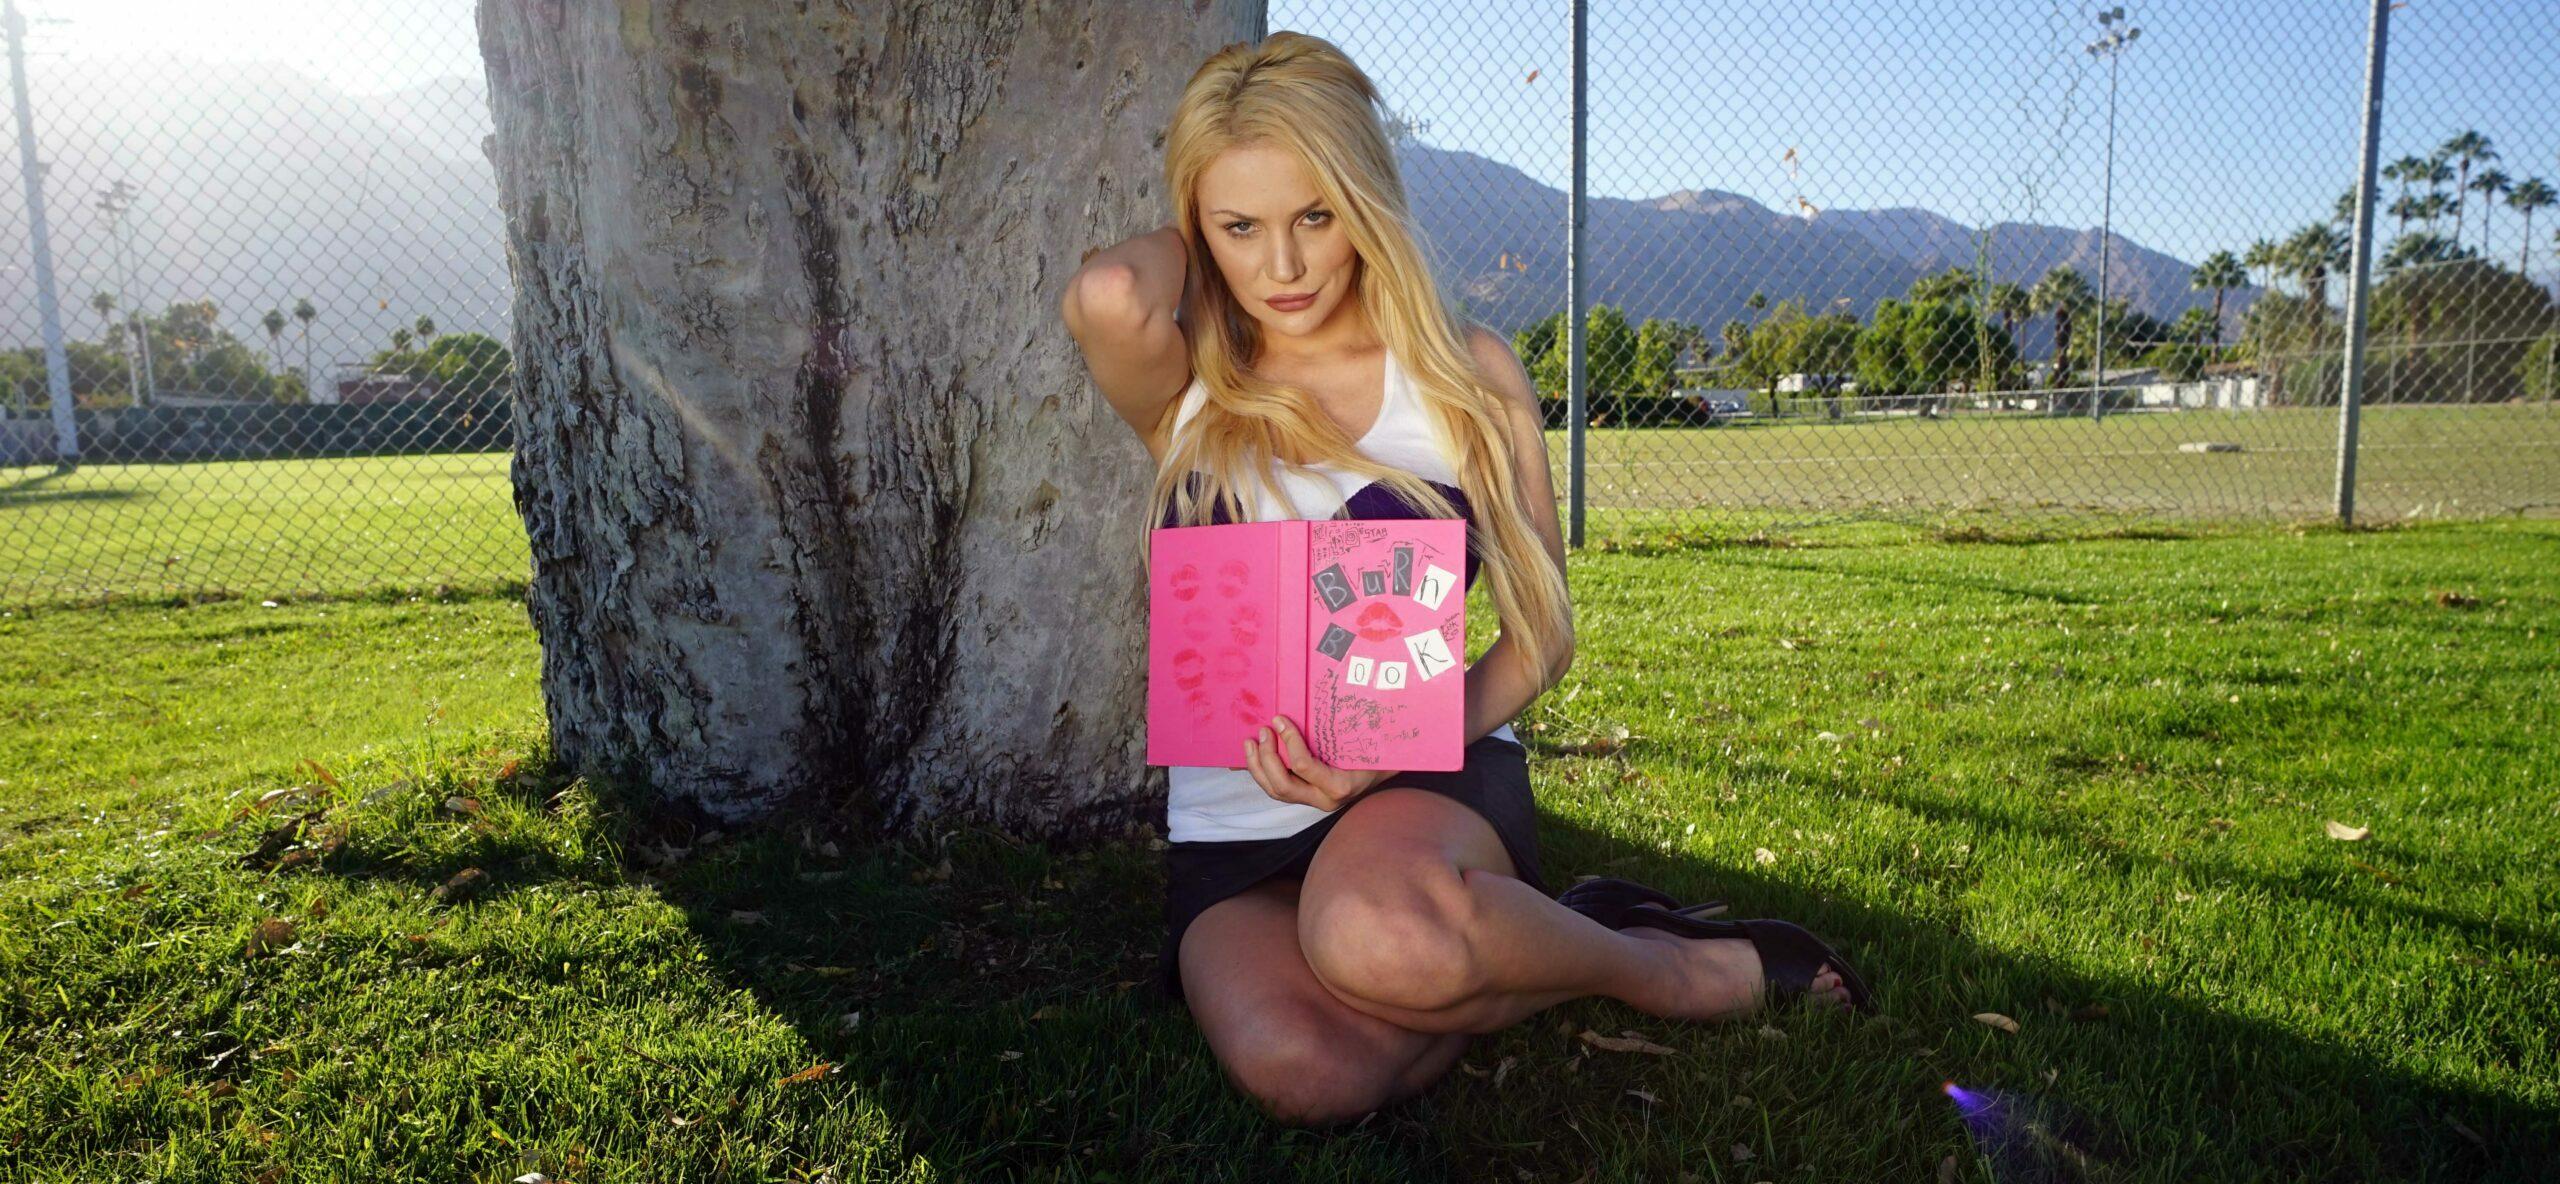 Courtney Stodden dresses up as Mean Girls character Regina George Regina was played by Rachel McAdams in the 2004 hit movie